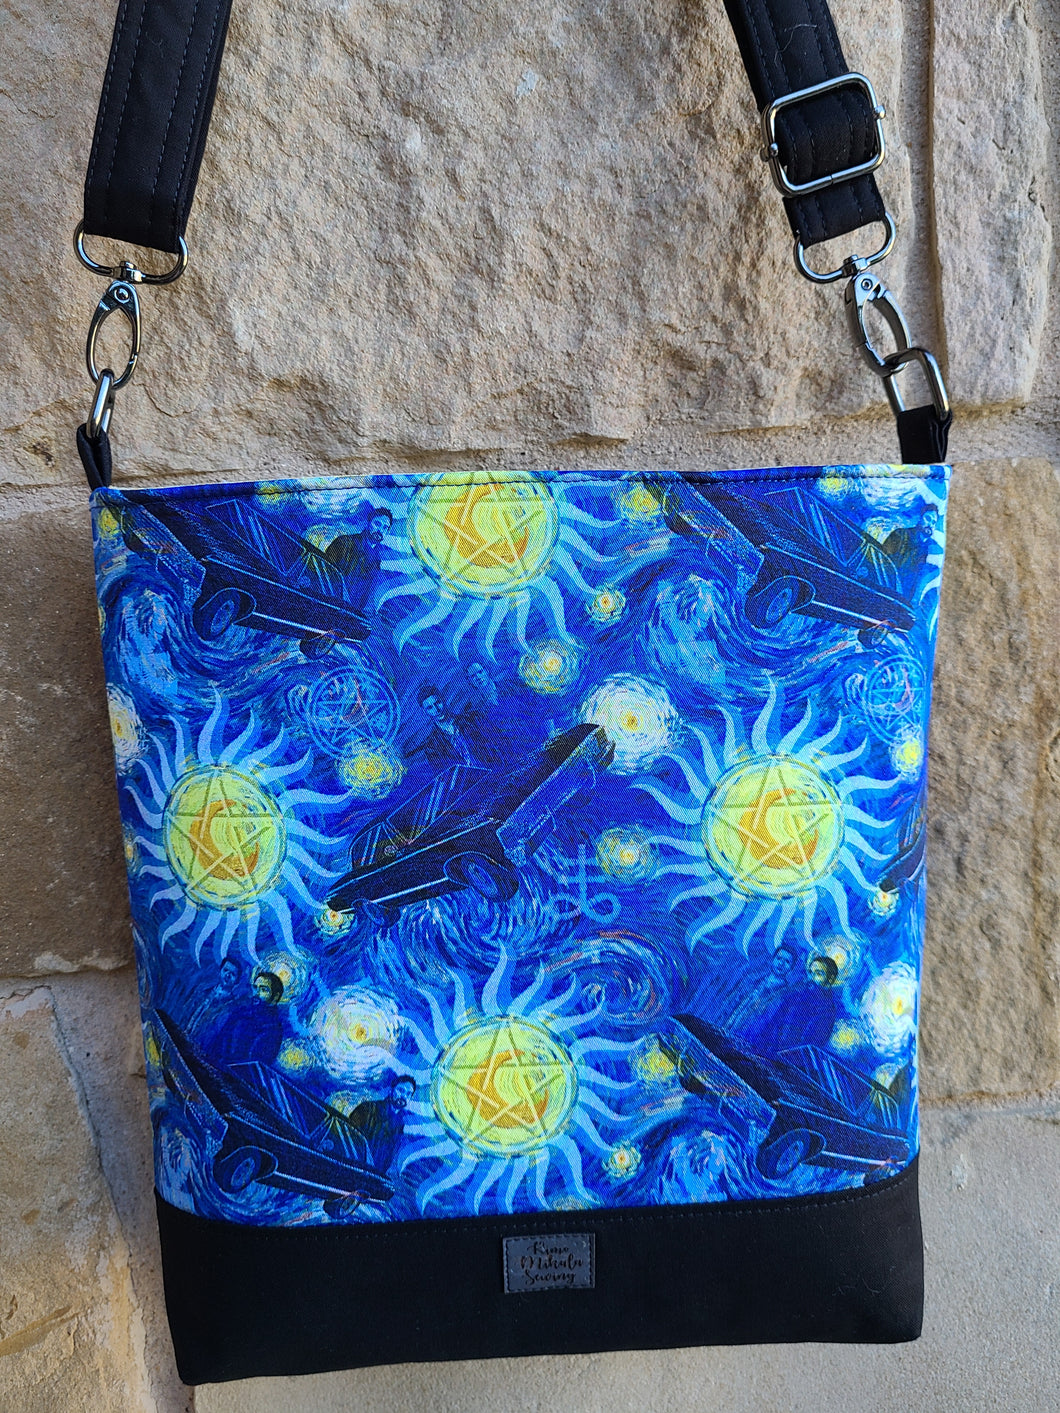 Messenger Bag Made With Super Starry Natural Inspired Fabric - Adjustable Strap - Zippered Closure - Zippered Pocket - Cross Body Bag